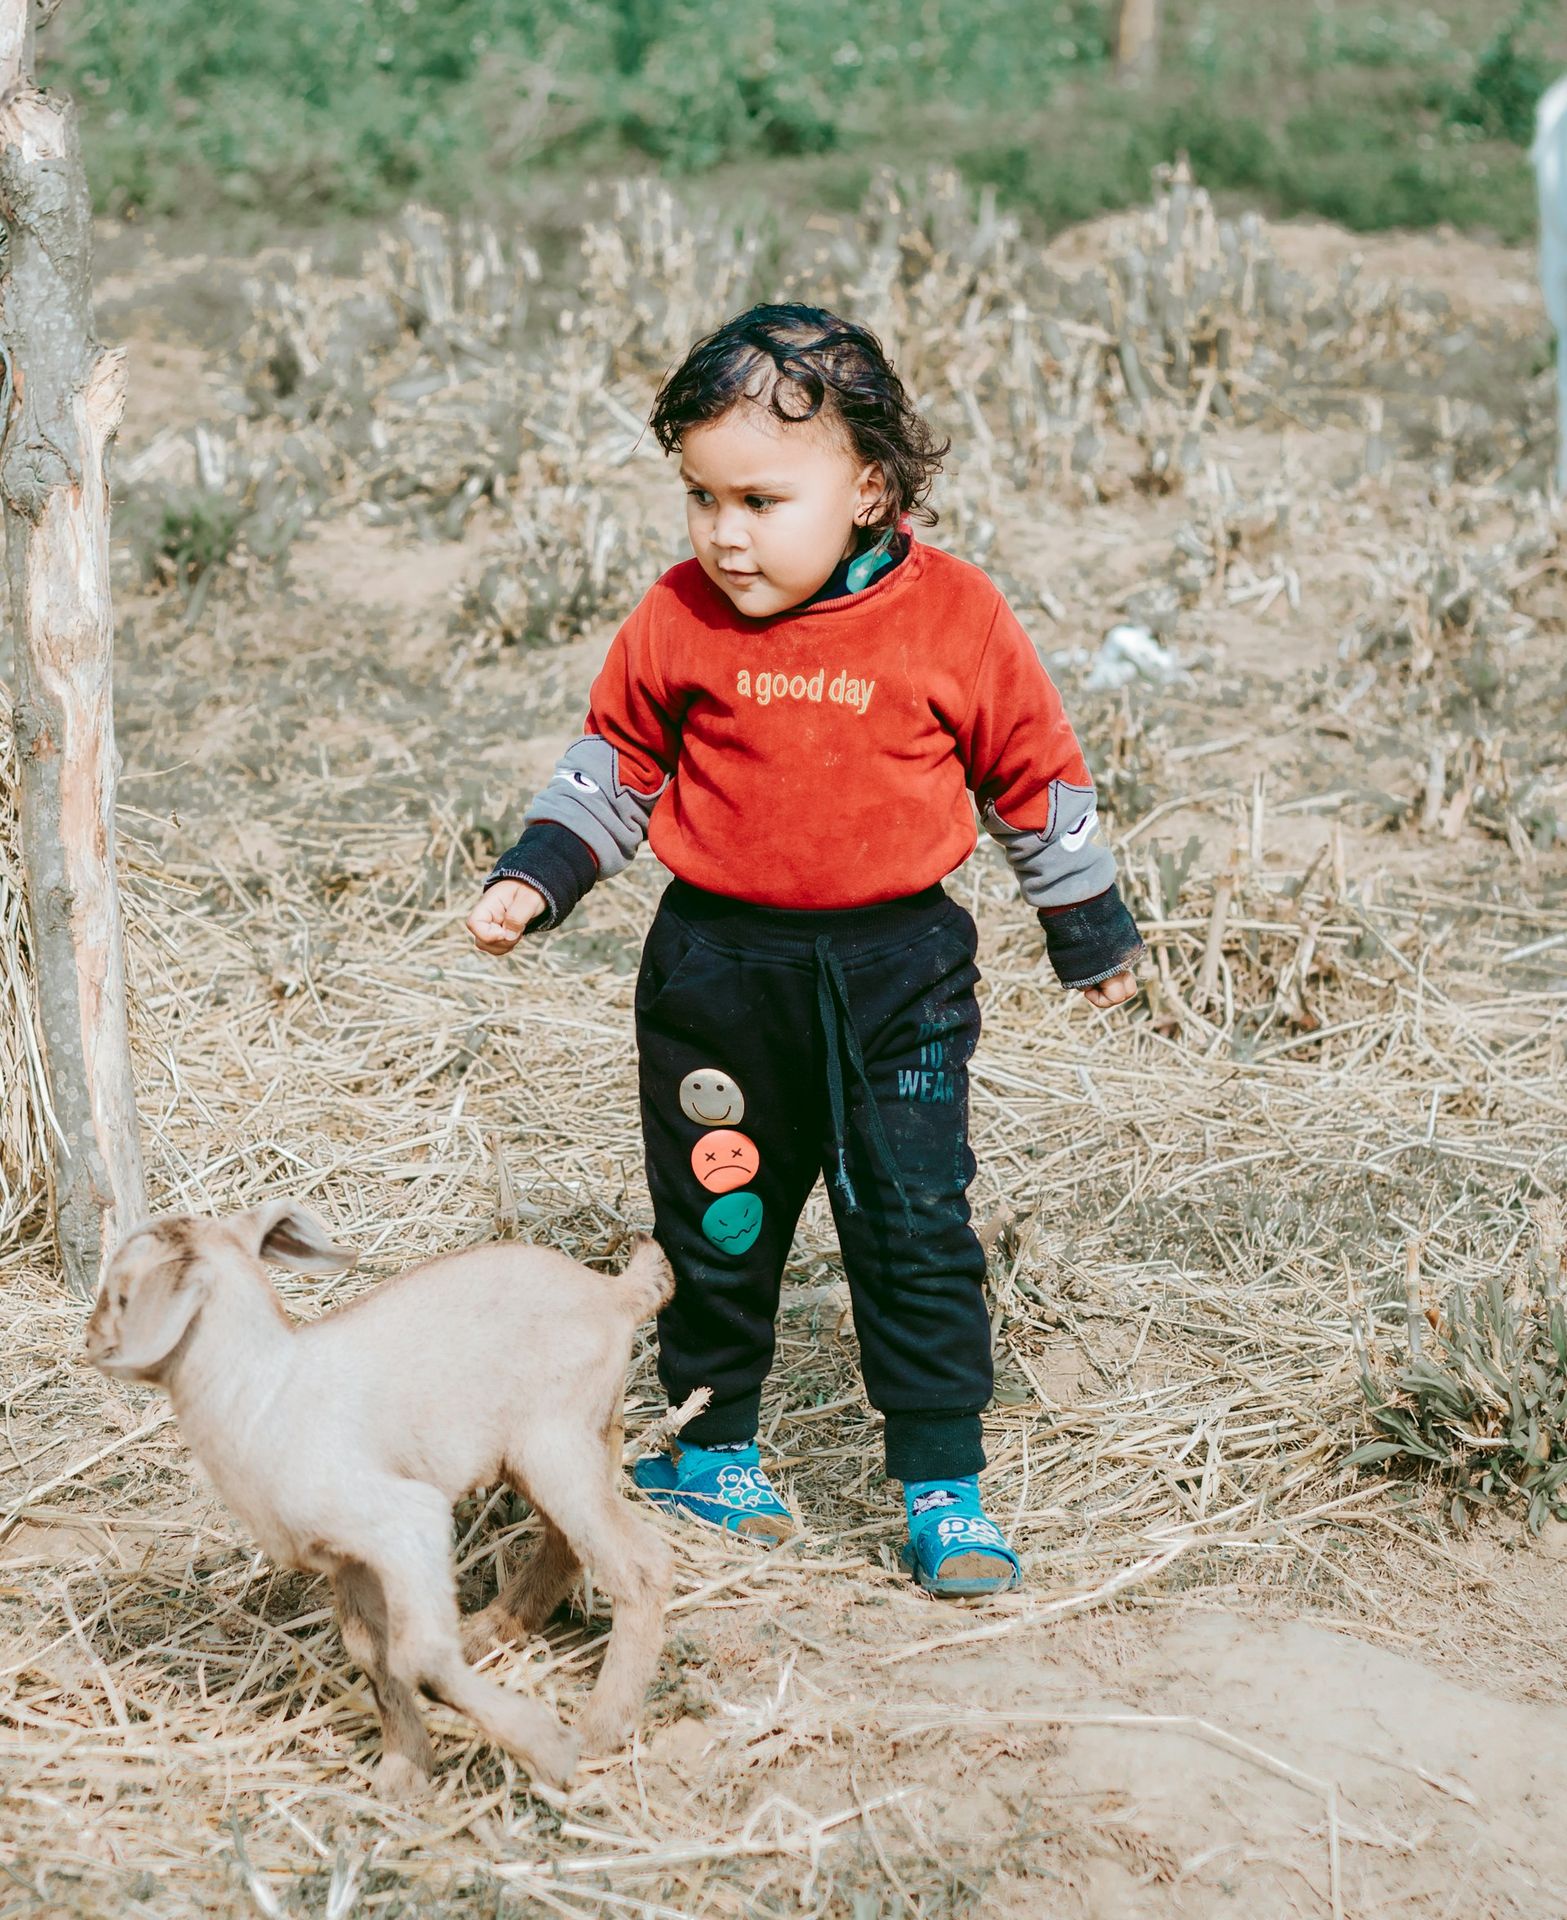 a small child standing next to a baby goat